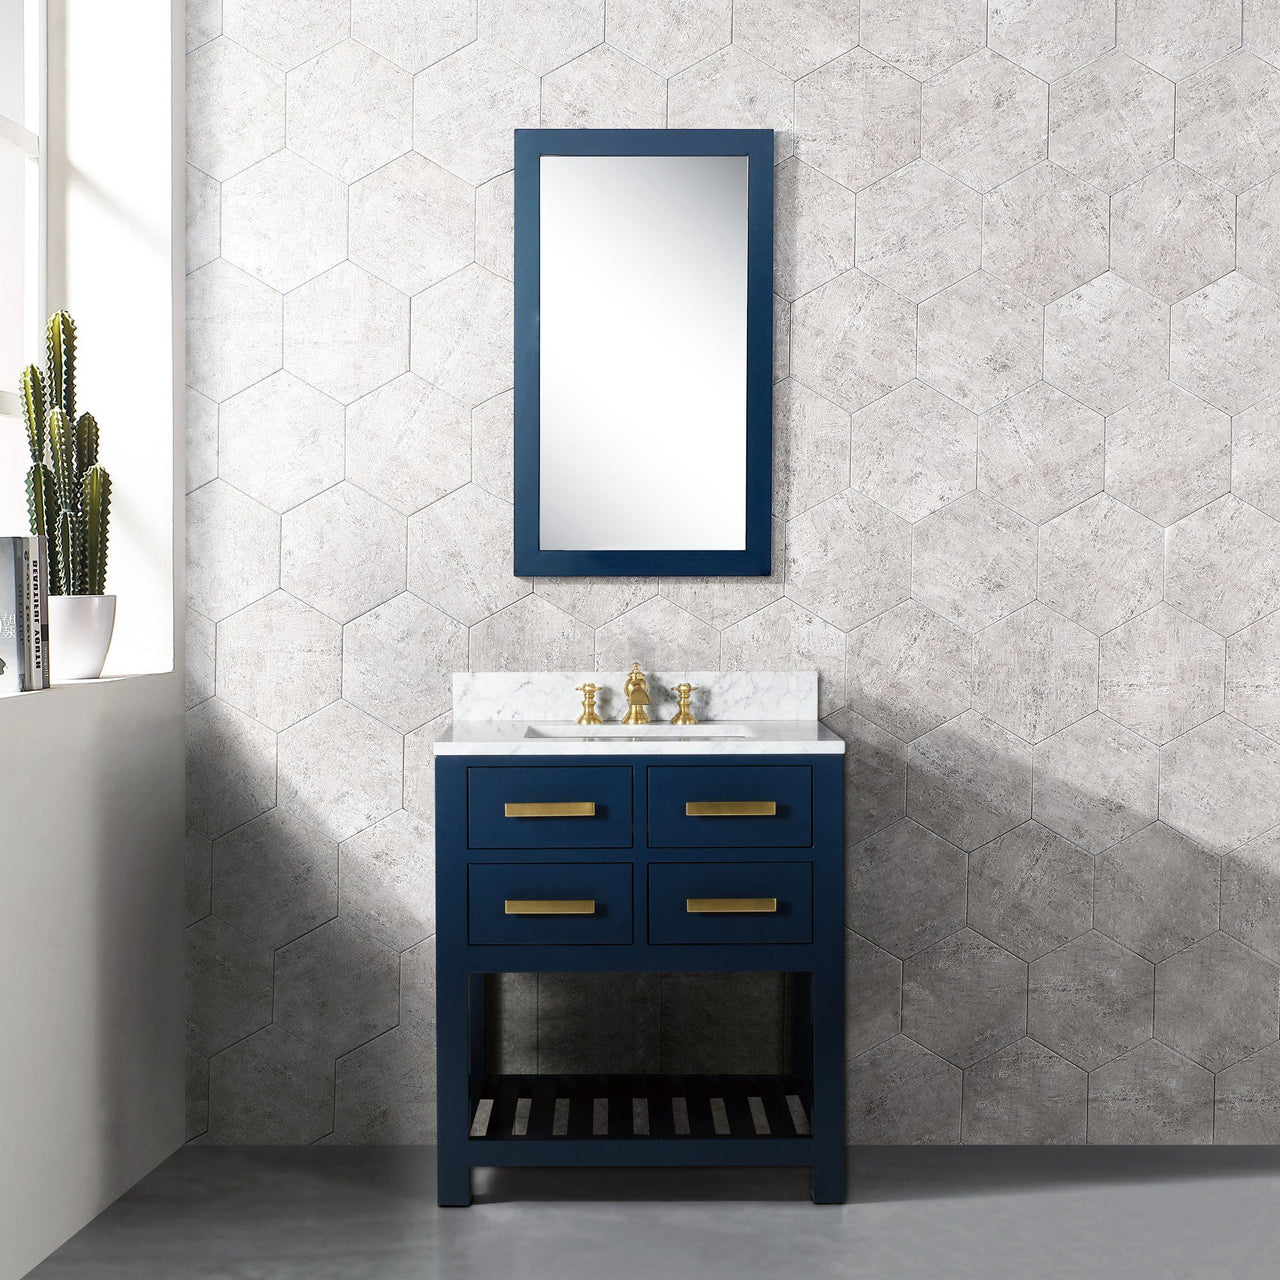 30 Inch Monarch Blue Single Sink Bathroom Vanity With F2-0013 Satin Brass Faucet From The Madalyn Collection Vanity Water Creation 